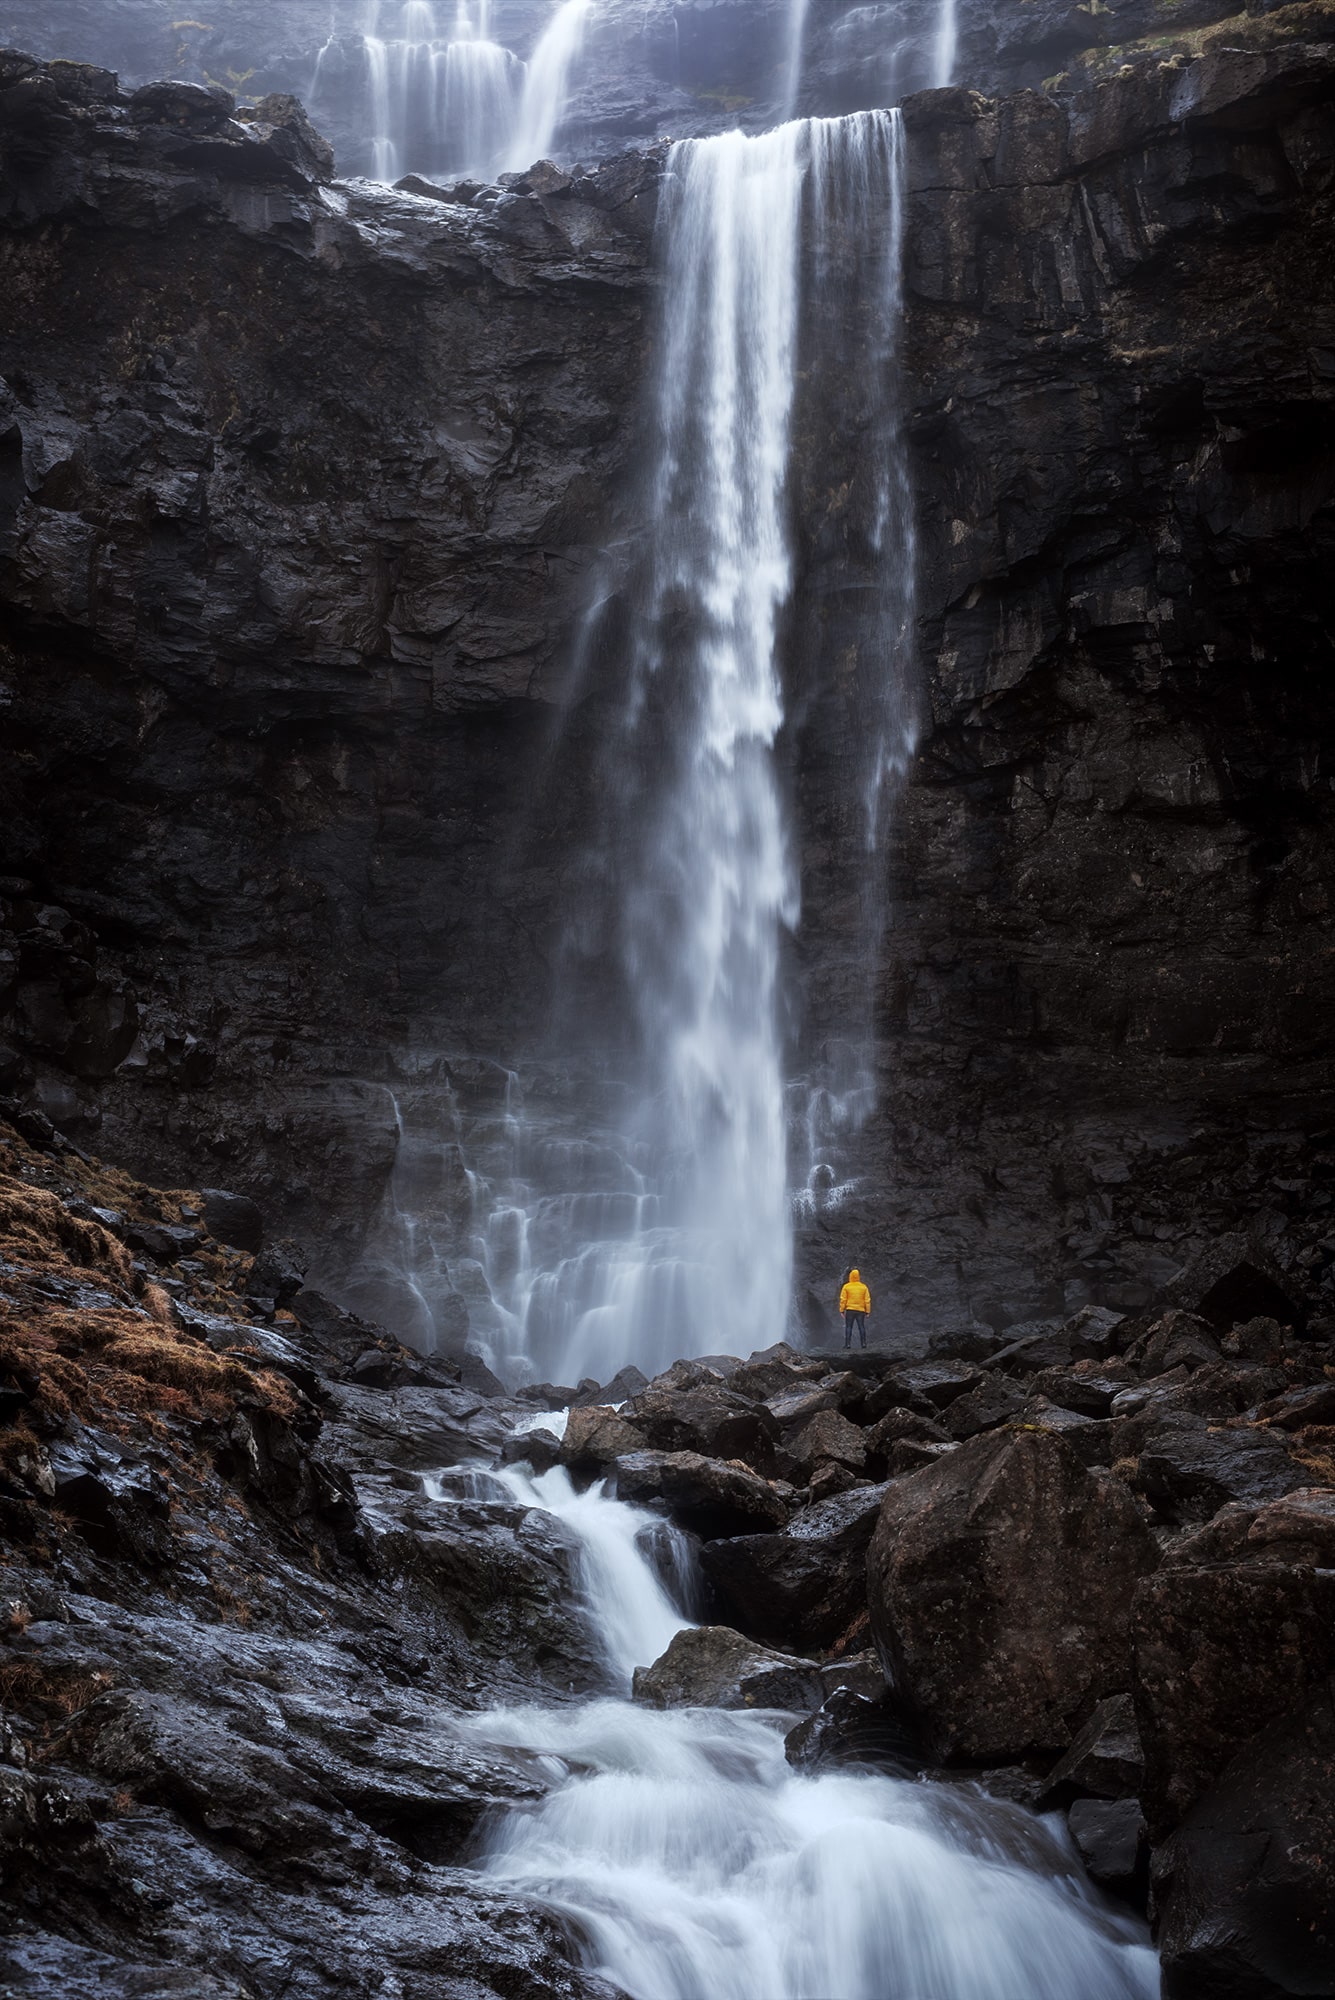 Embark on a visual journey through mesmerizing landscape photography capturing a lone figure clad in a vibrant yellow raincoat standing at the base of the majestic Fossa waterfall in the Faroe Islands. Marvel at the sheer magnitude and natural beauty as the cascading water plunges into the rugged terrain, creating an awe-inspiring spectacle. Immerse yourself in the raw power of nature and the serene tranquility of this remote island landscape.